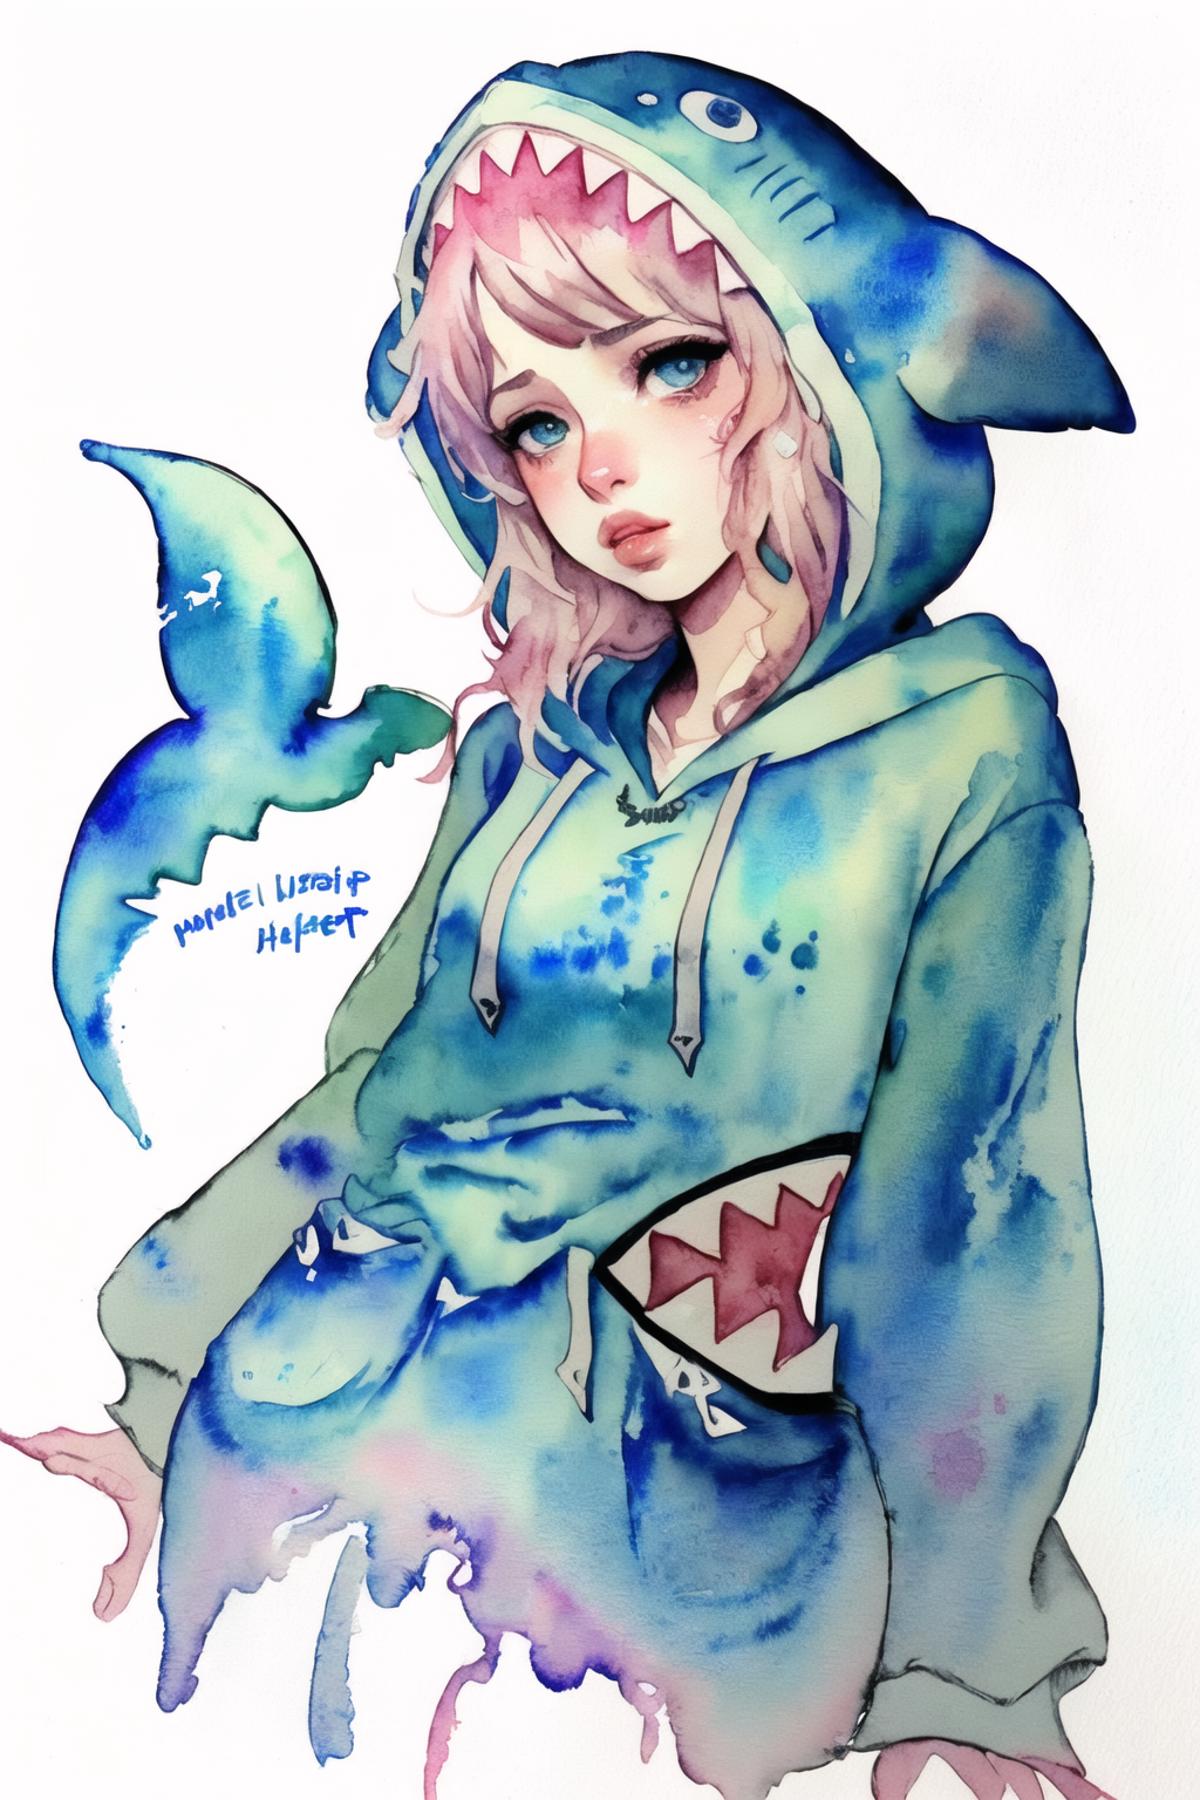 Better Watercolor painting - In the style of Iris Compiet image by NostalgiaForever